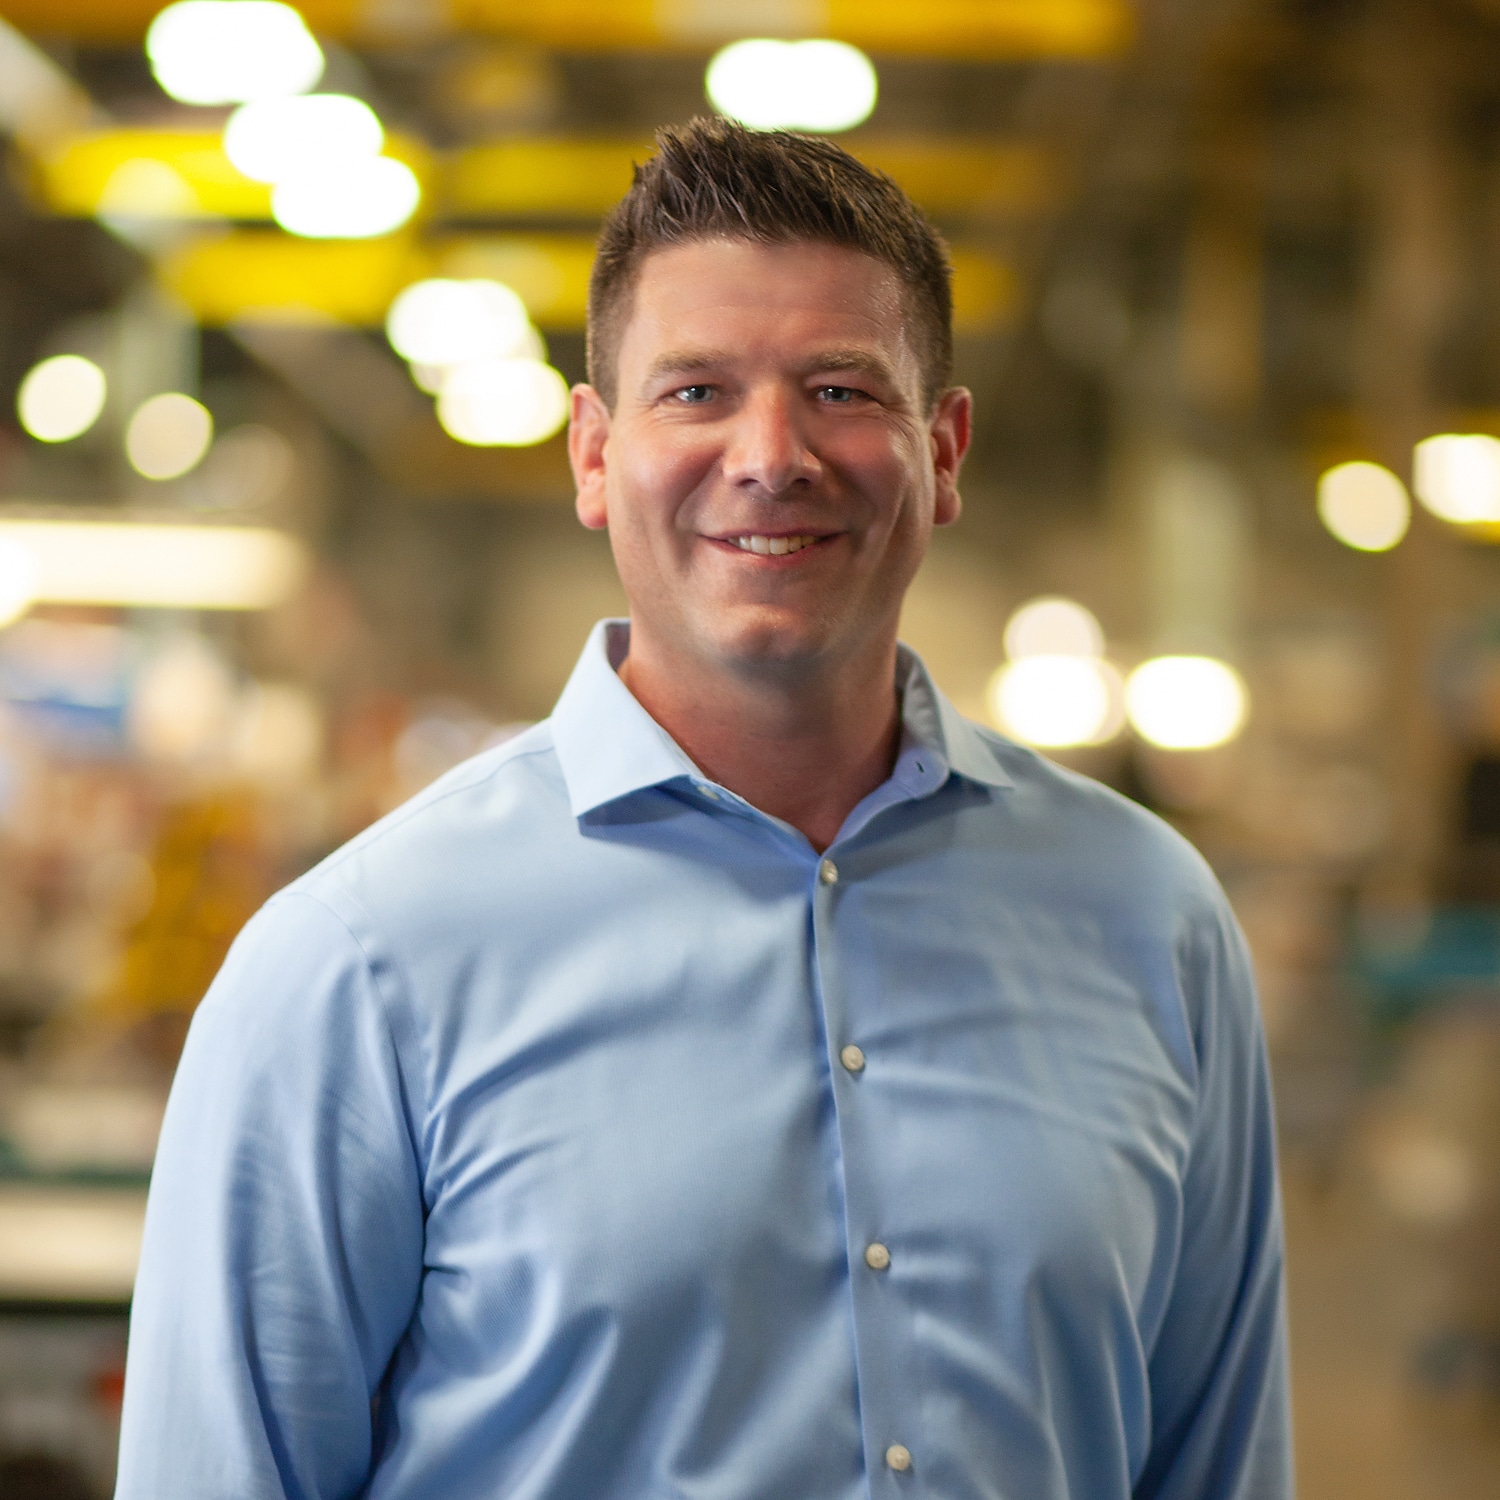 RoMan Promotes Donnie Crist to Director of Sales for the Resistance Welding Group